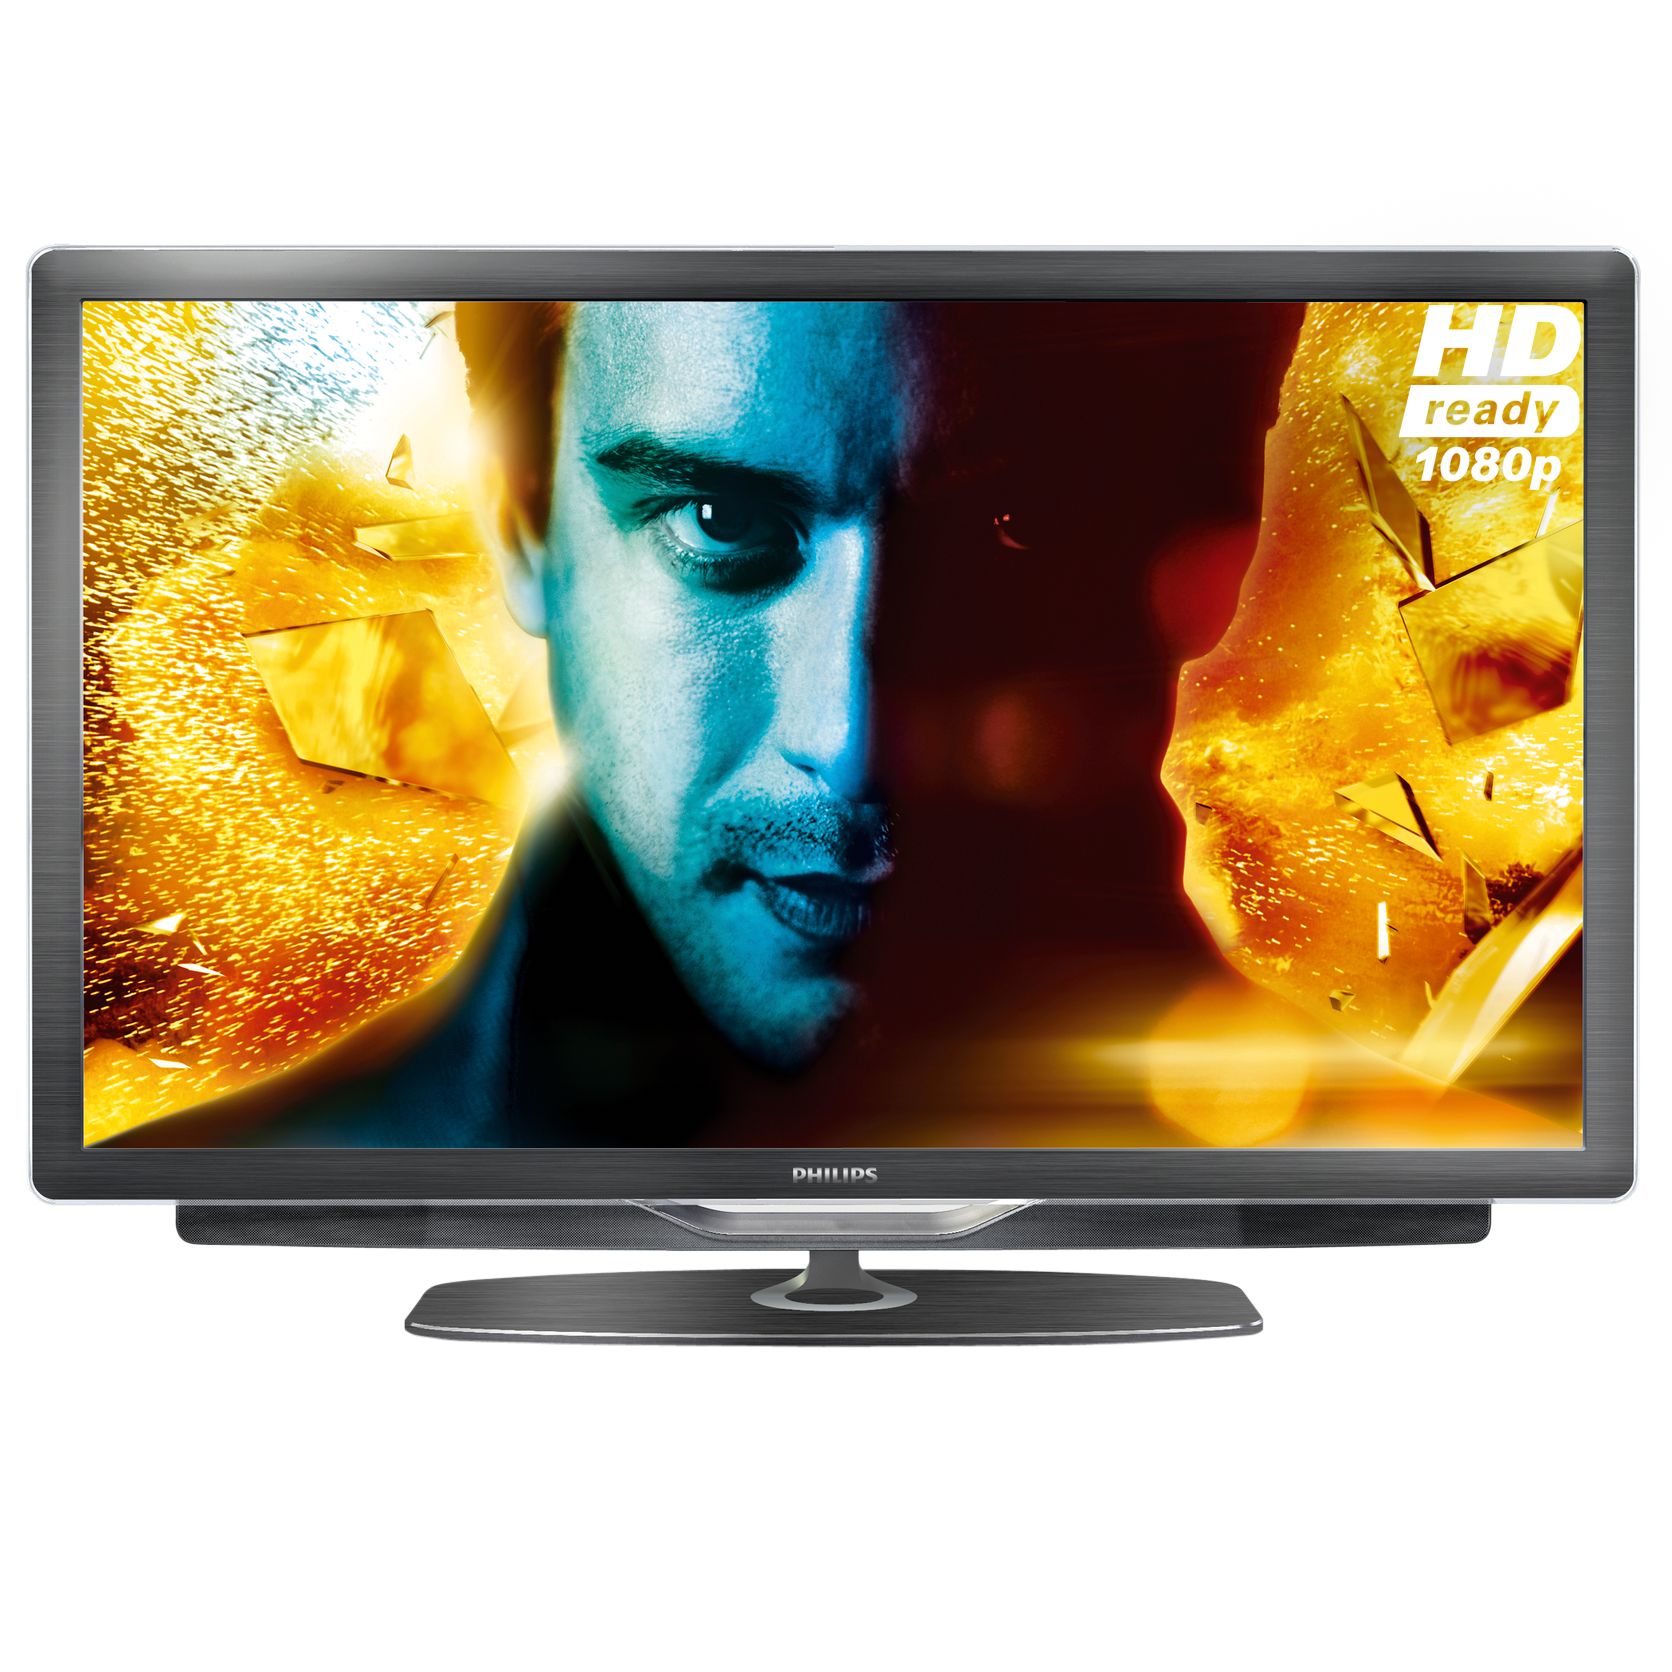 Philips 32PFL9705H/12 LCD/LED HD 1080p Television, 32 Inch at John Lewis